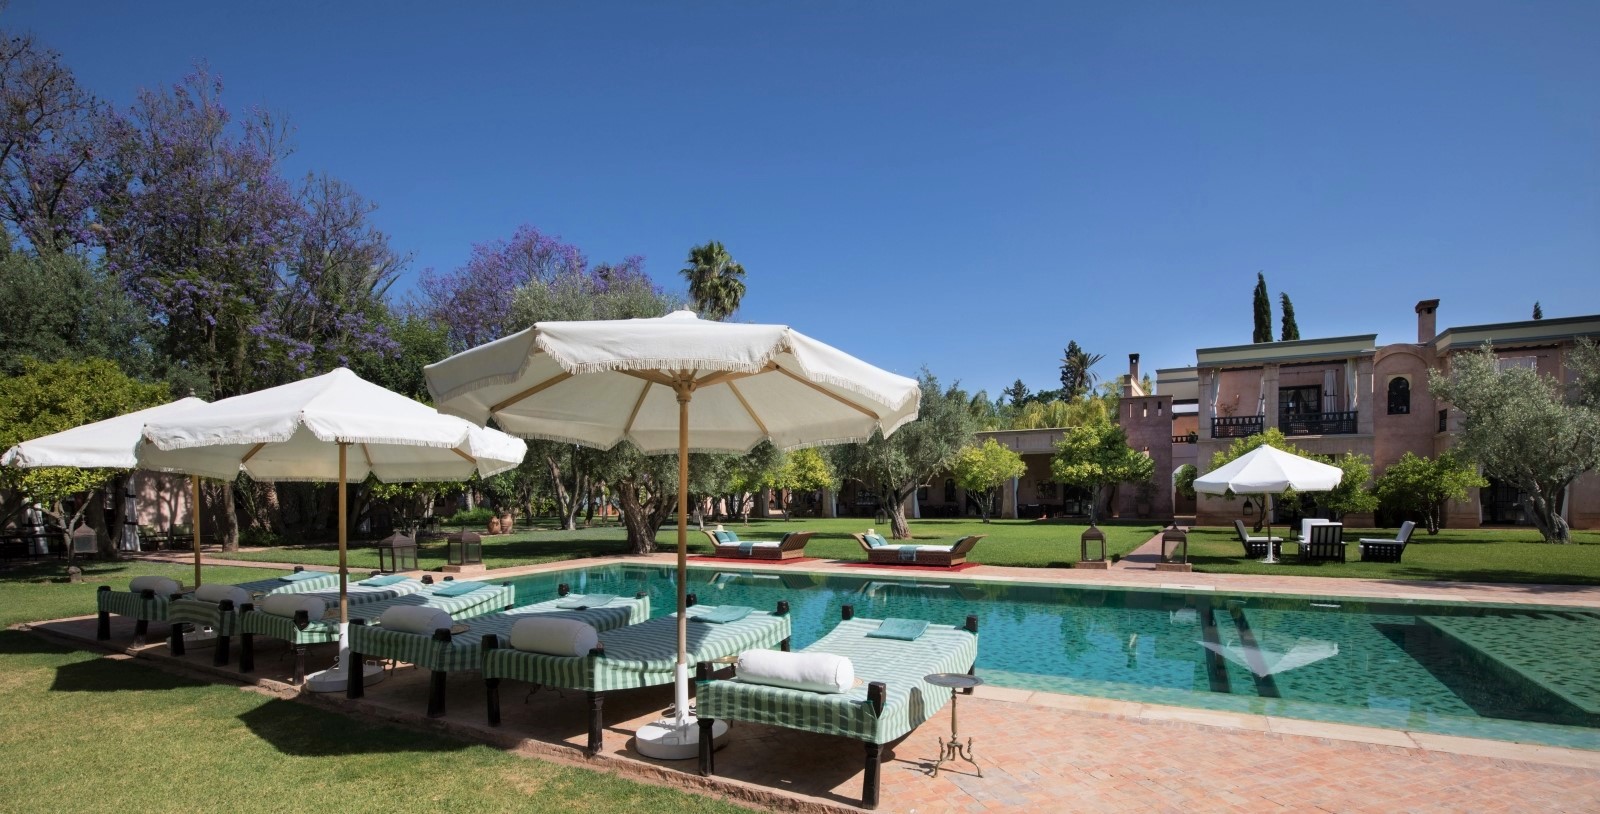 Garden and pool area with sun loungers, umbrellas, lanterns and purple trees at Ezzahra in Marrakech, Morocco